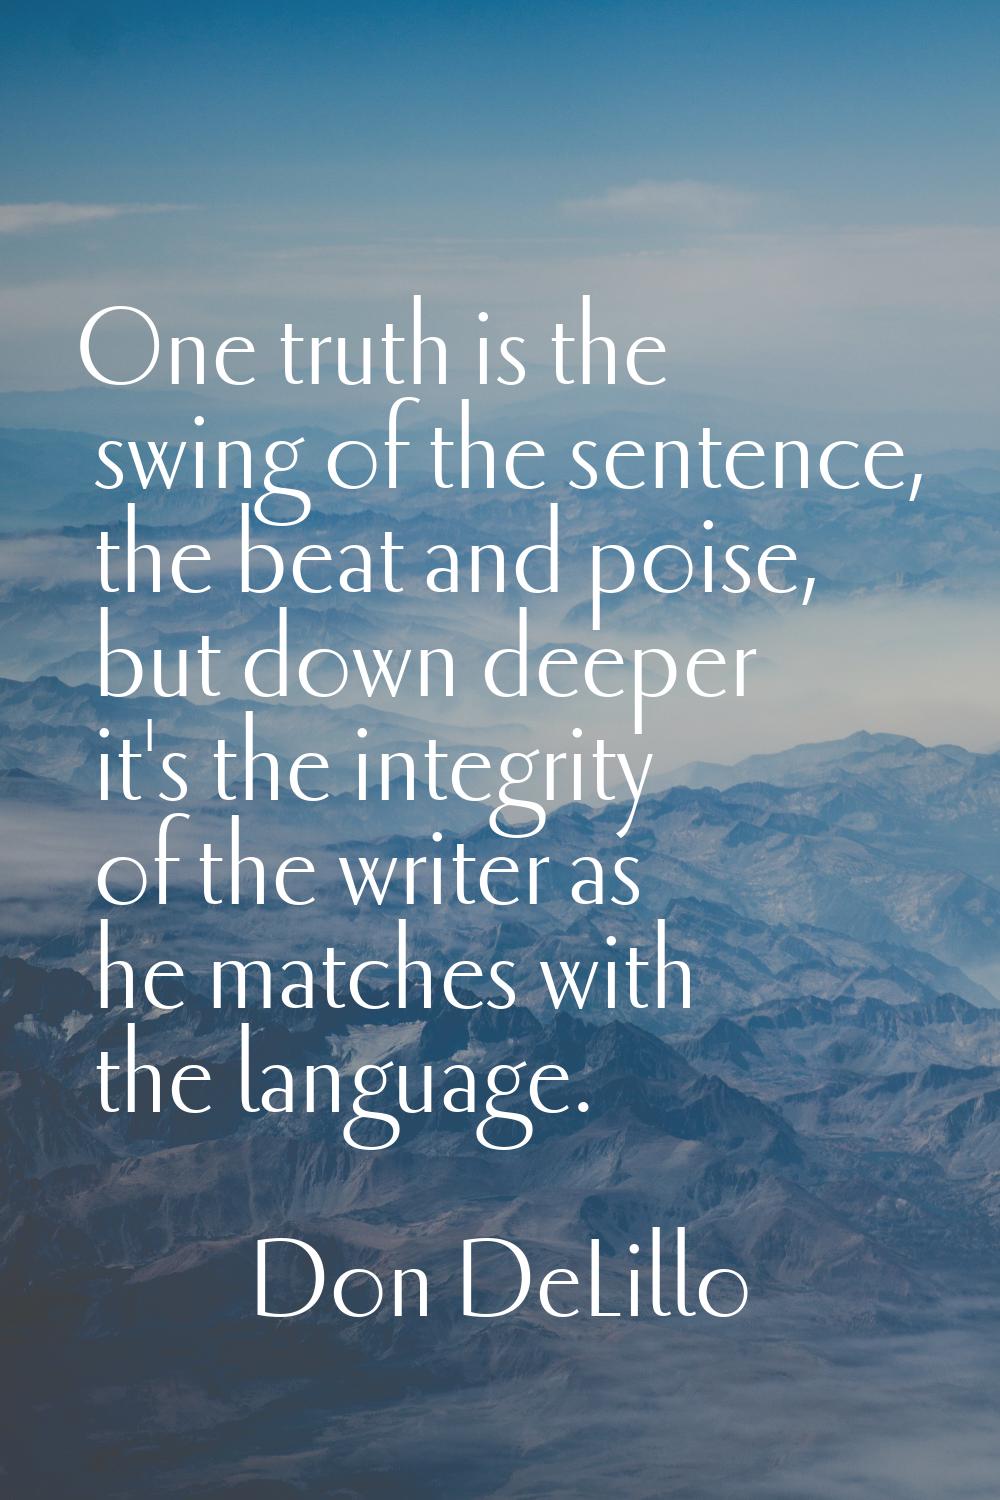 One truth is the swing of the sentence, the beat and poise, but down deeper it's the integrity of t